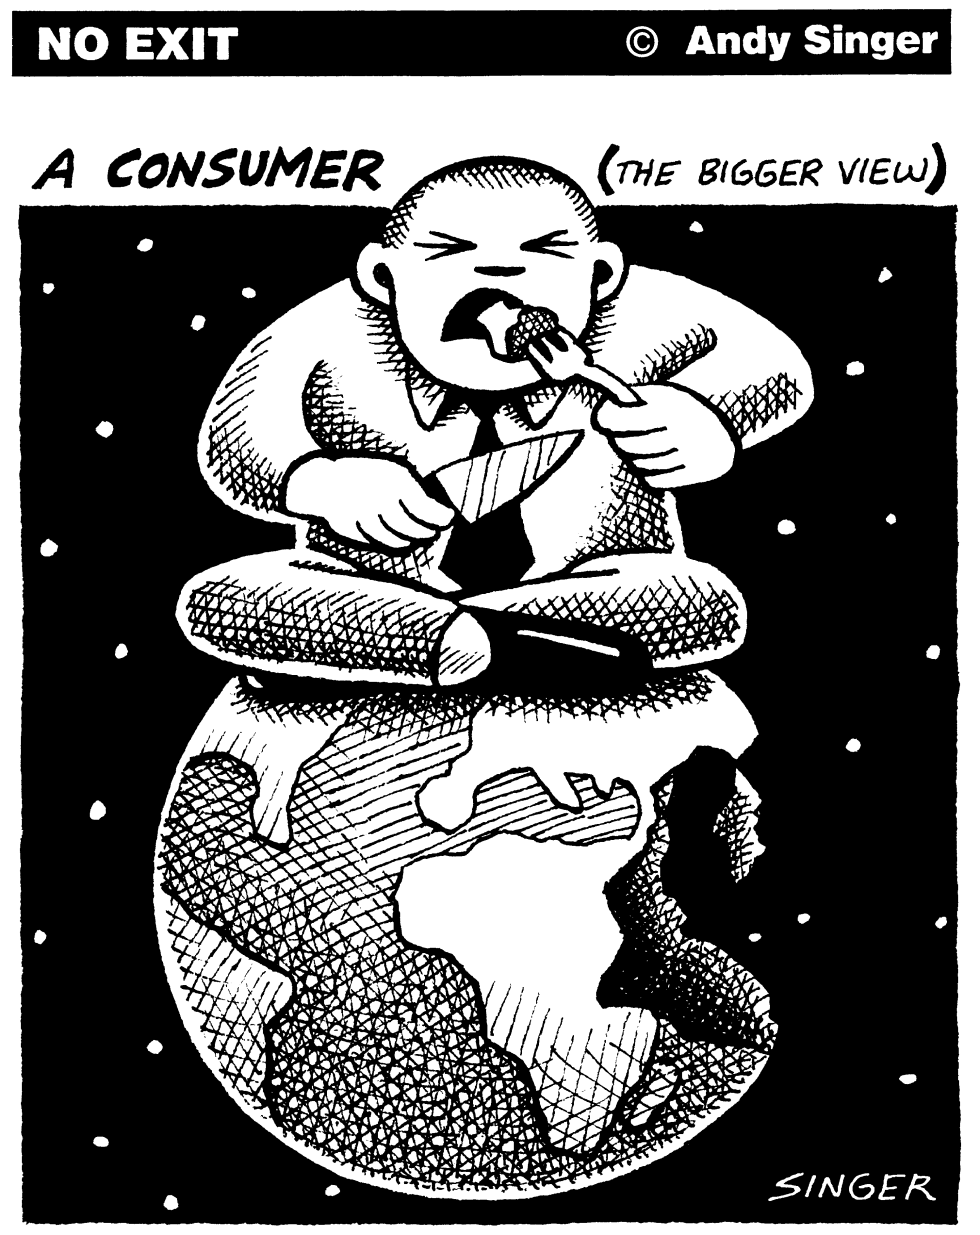 CONSUMER A BIGGER VIEW by Andy Singer